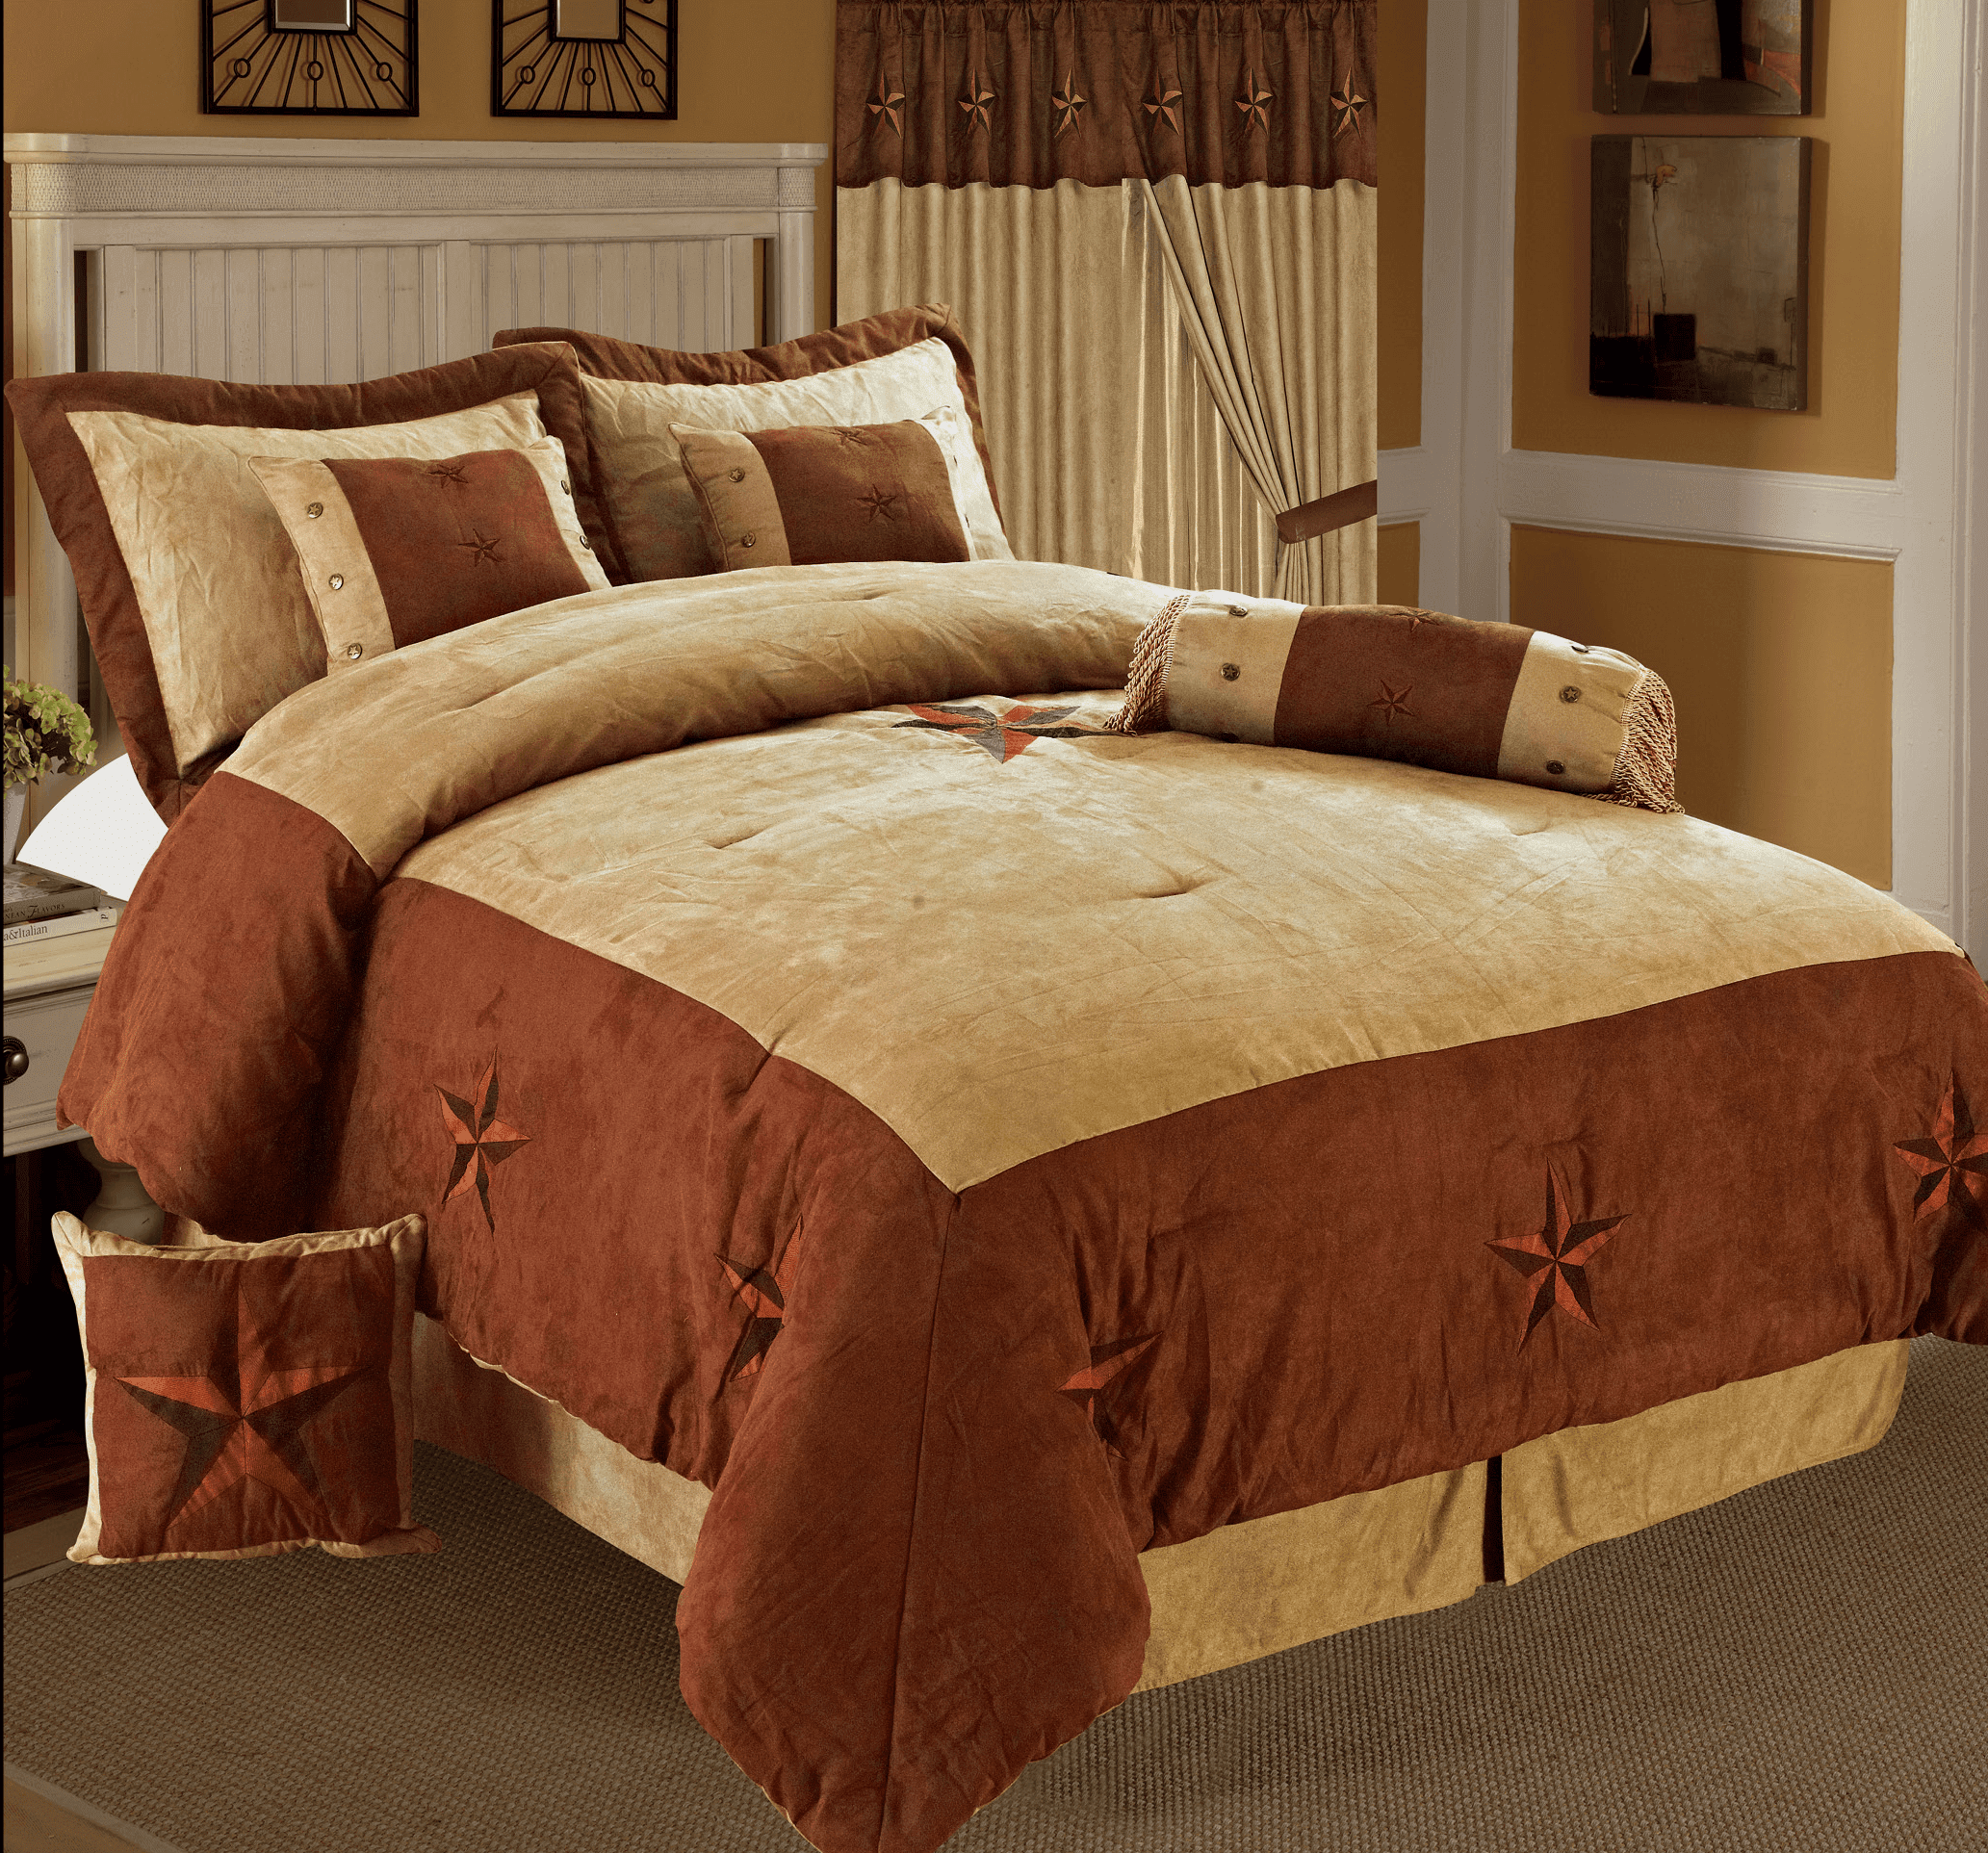 7-Piece Teal Brown Western Lodge MicroSuede Pleated Striped Comforter Set 